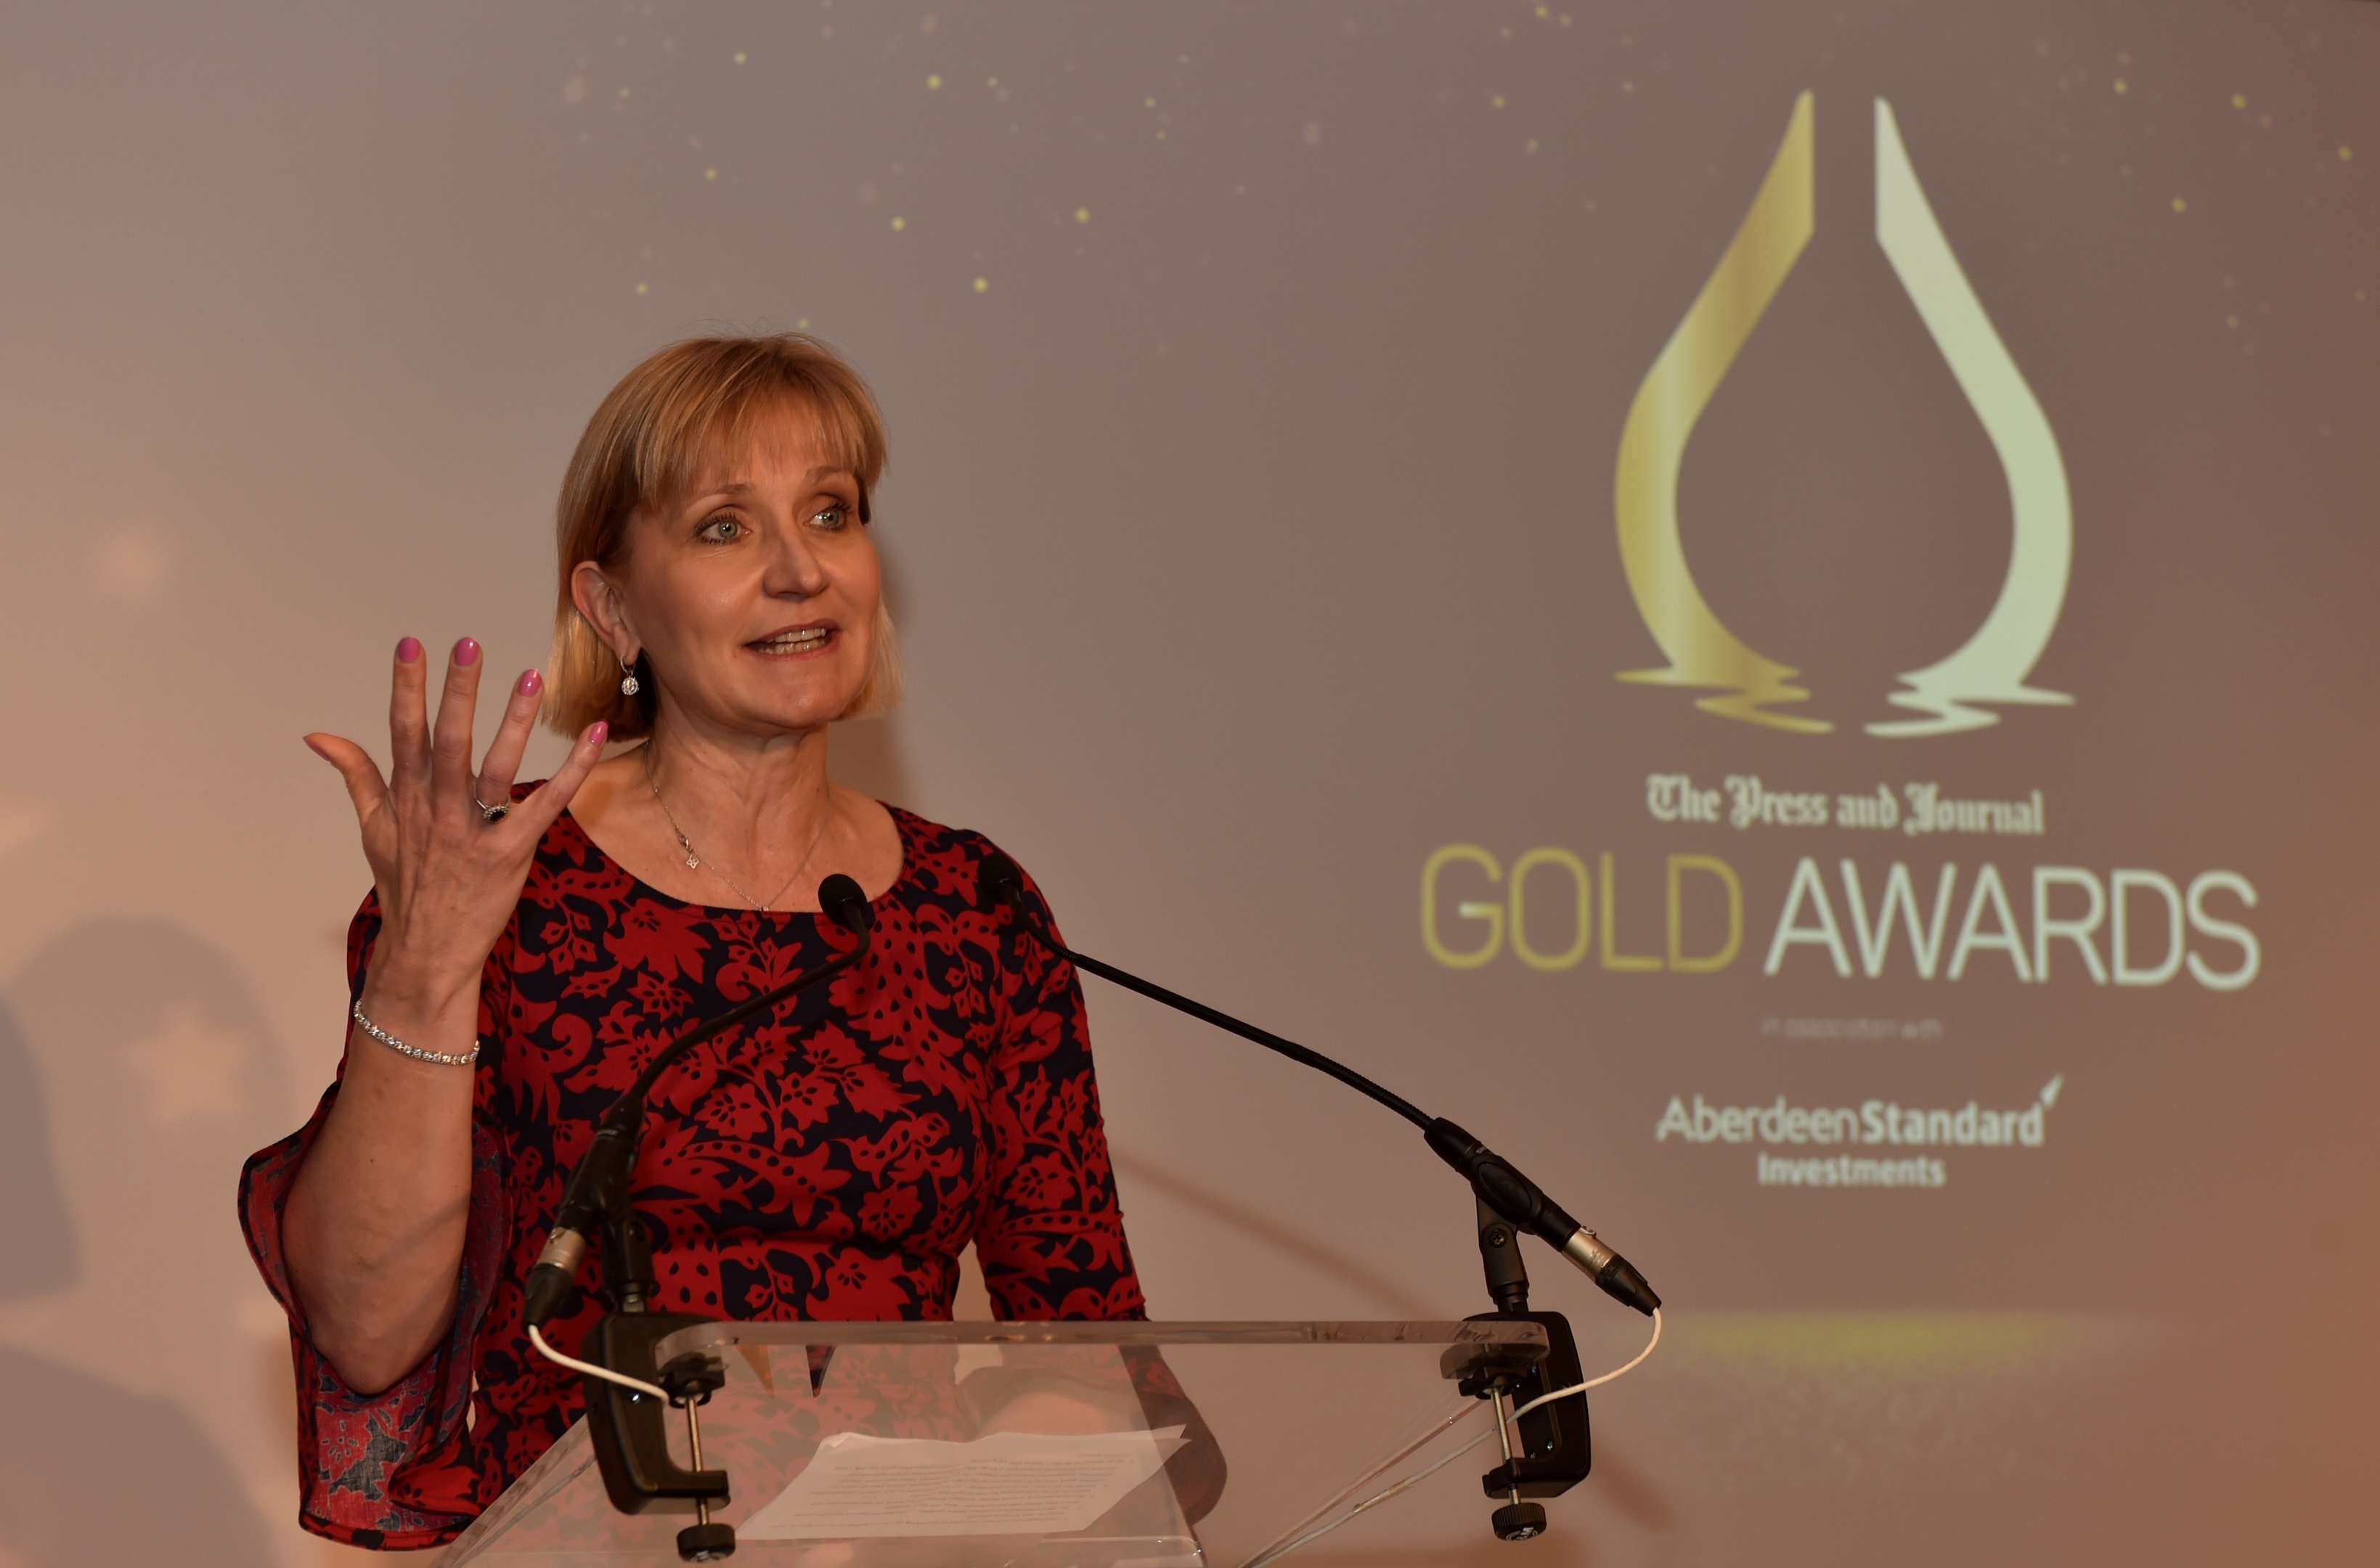 Gold awards held at the Marcliffe Hotel and Spa, Aberdeen.
Deirdre Michie.
Picture by COLIN RENNIE September 8, 2017.